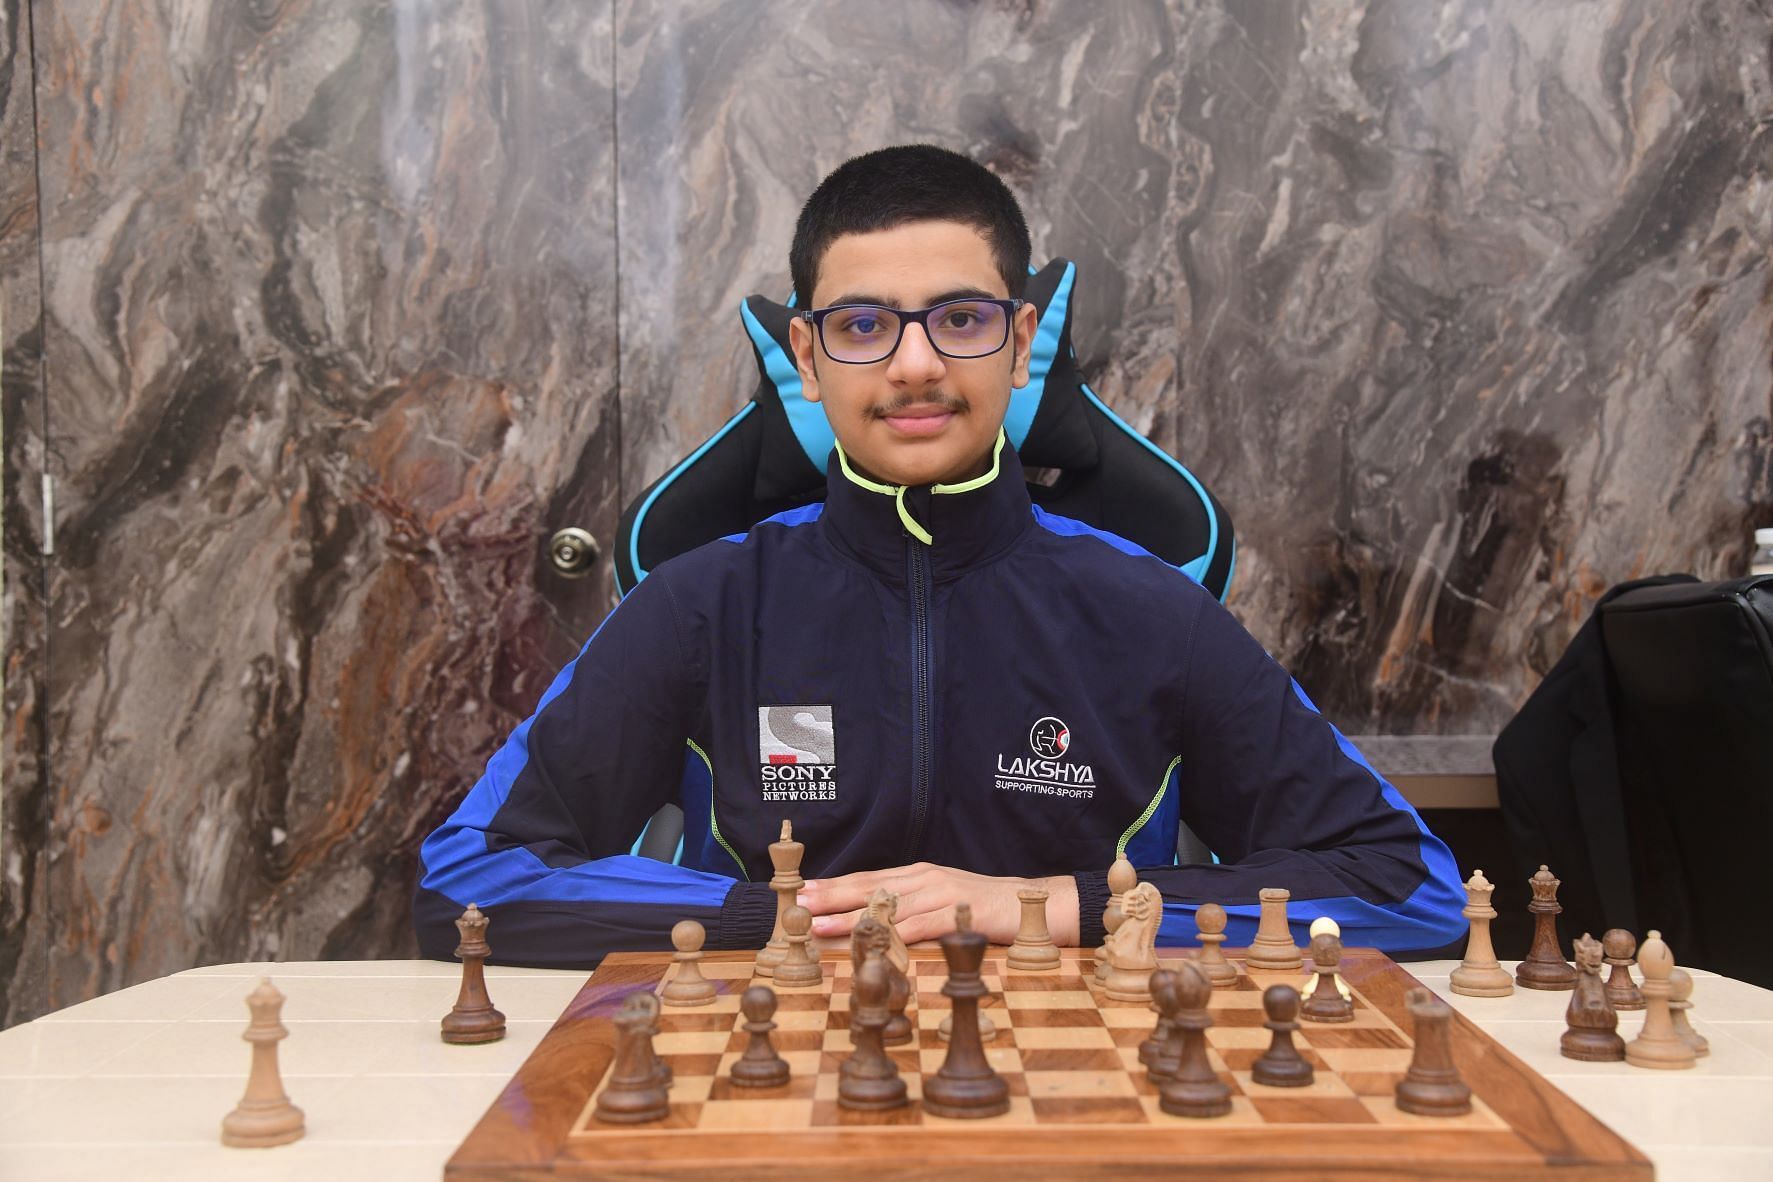 Young Grandmaster Raunak Sadhwani will be eager to compete at the 44th Chess Olympiad. (Pic credit: AICF)